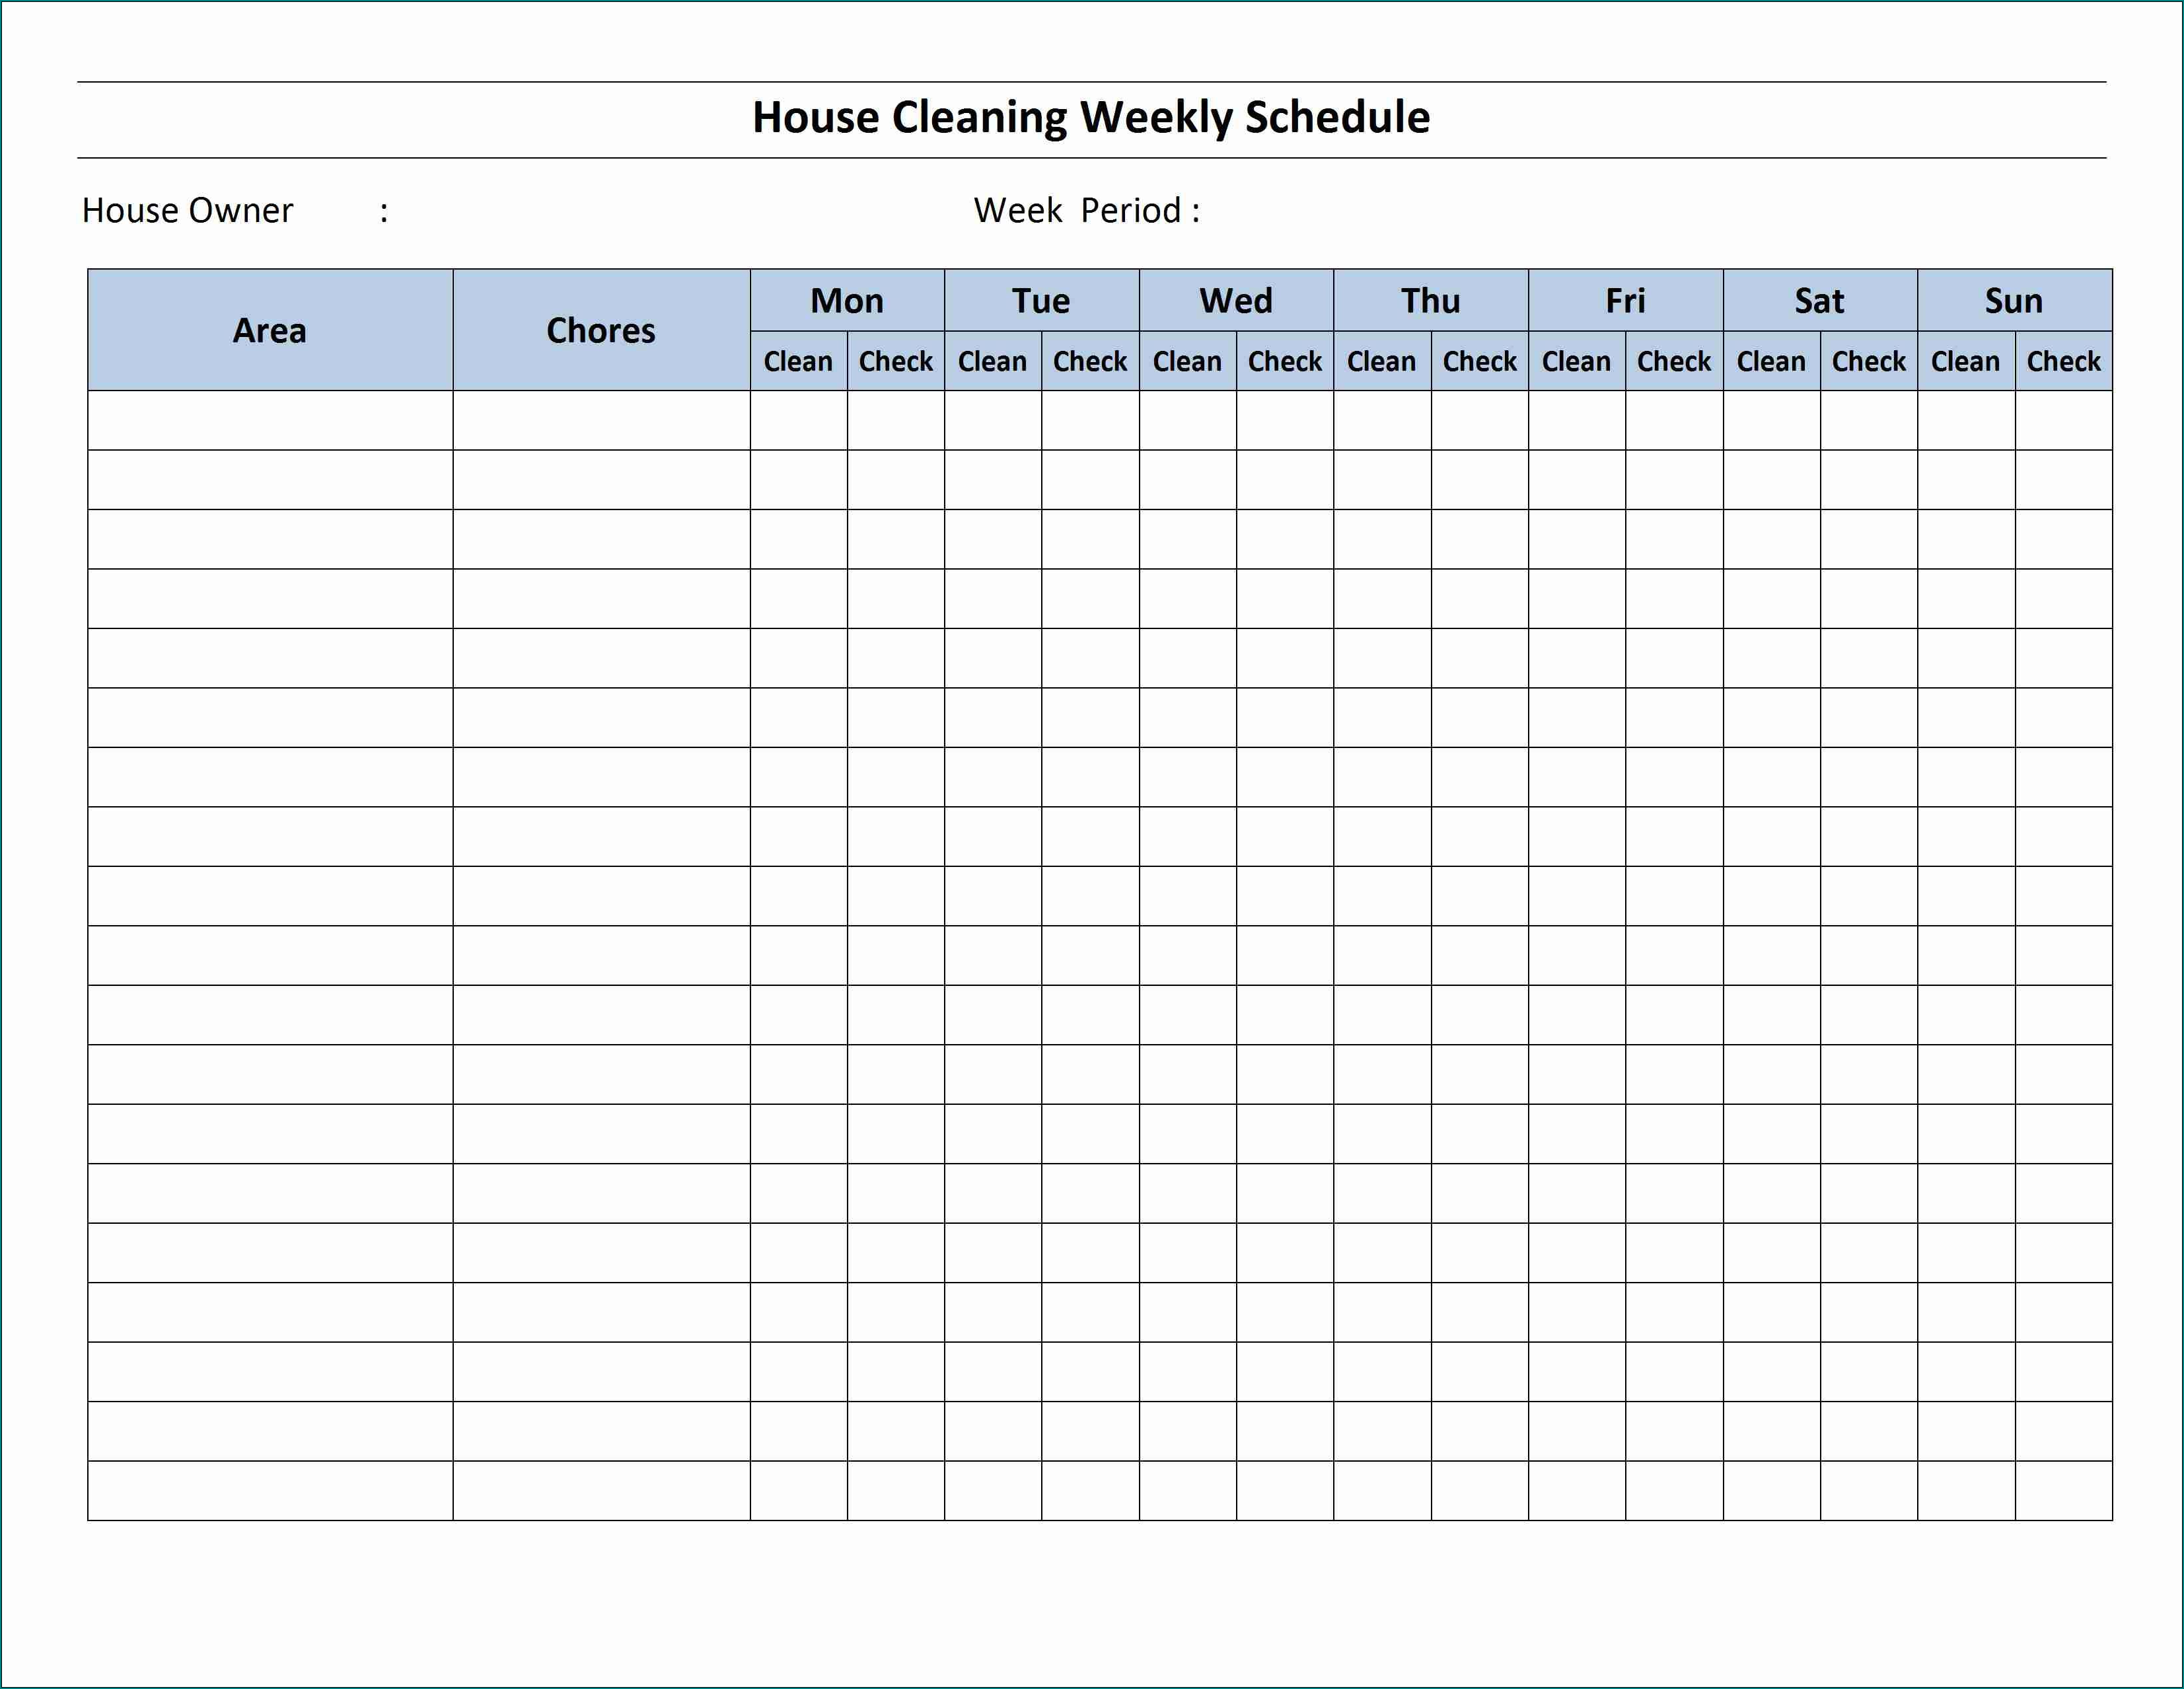 Example of Cleaning Schedule Template